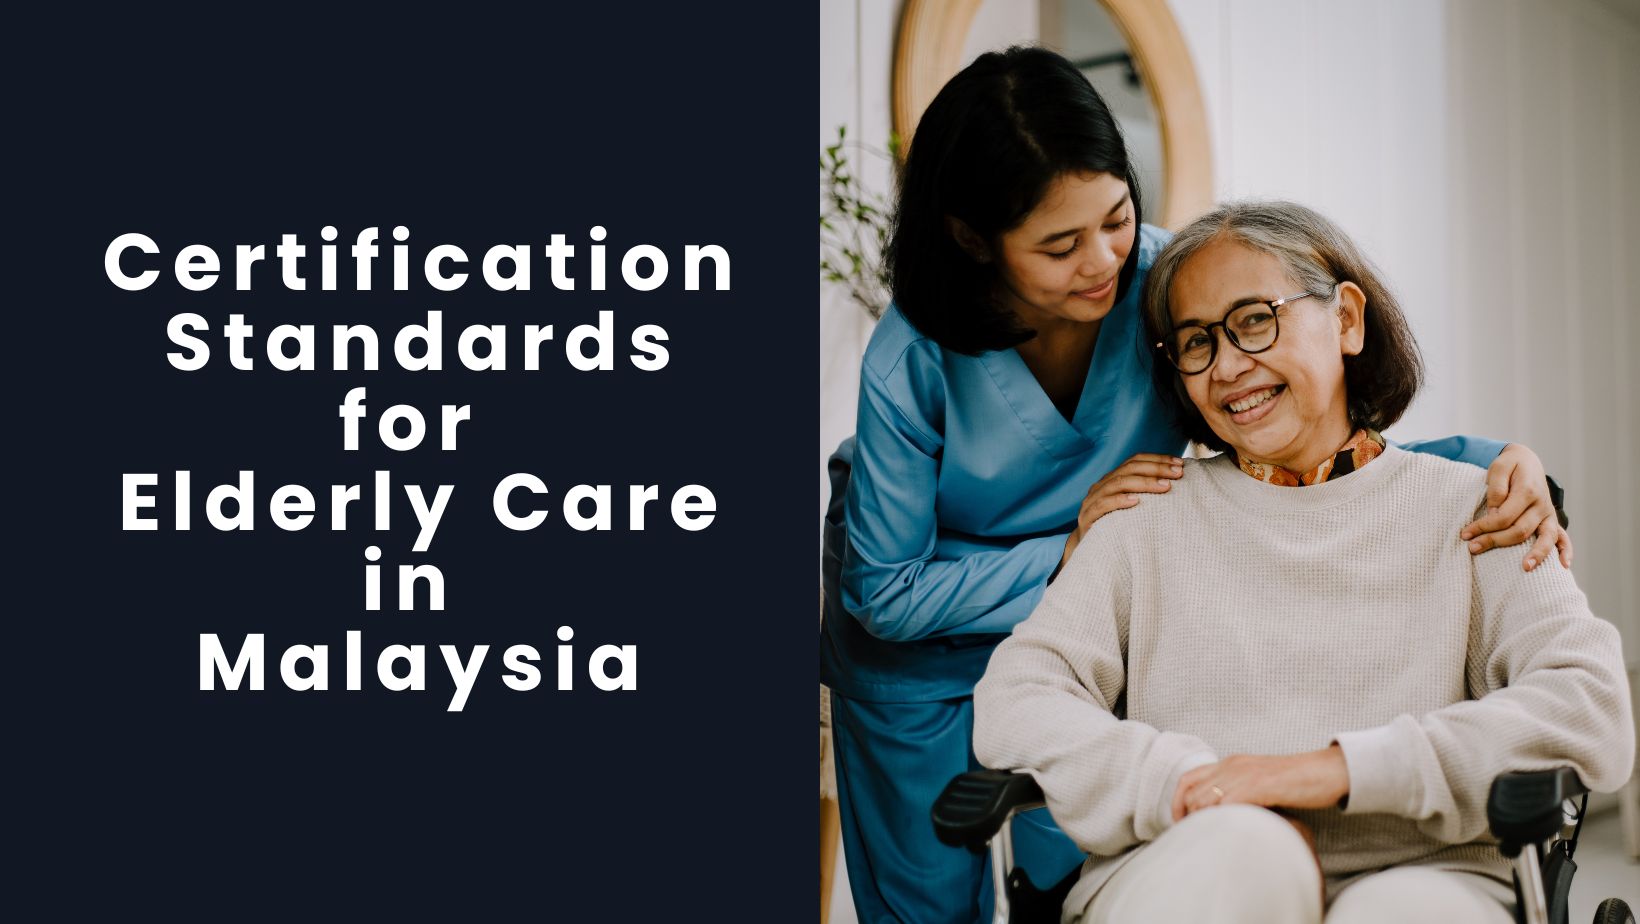 Certification Standards for Elderly Care in Malaysia iElder Asia